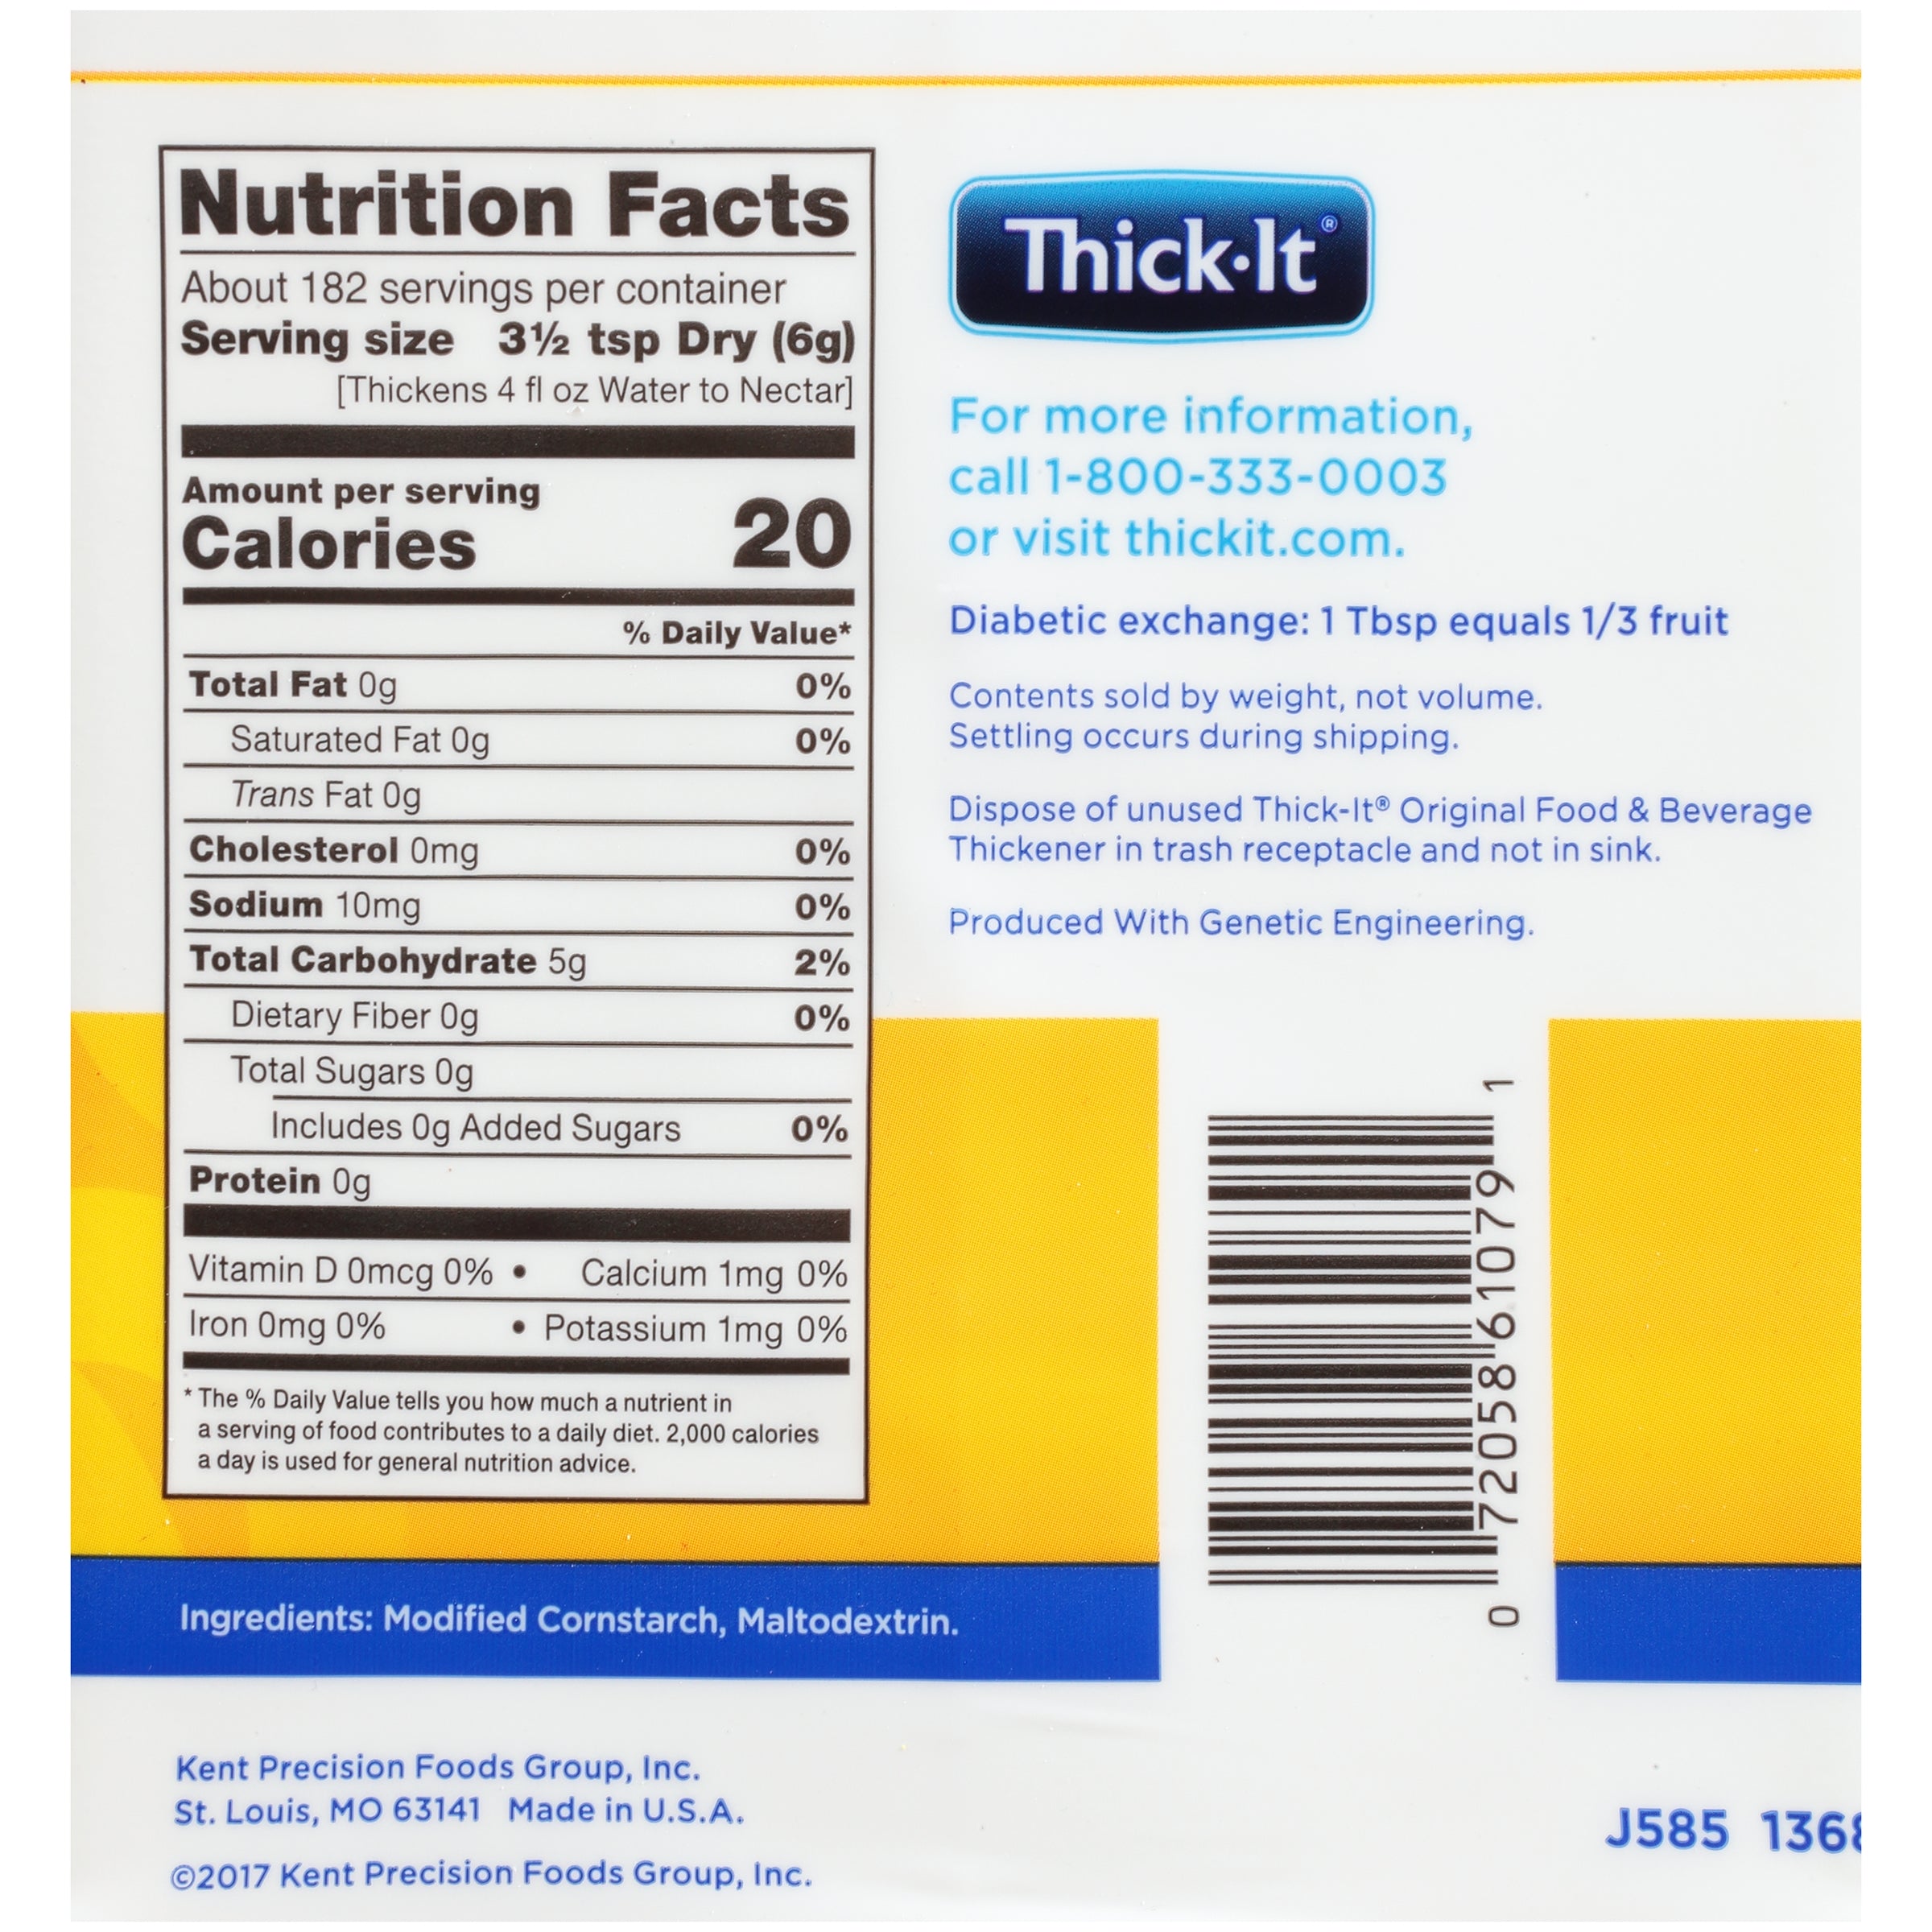 Food and Beverage Thickener Thick-It Original 36 oz. Canister Unflavored Powder IDDSI Level 0 Thin